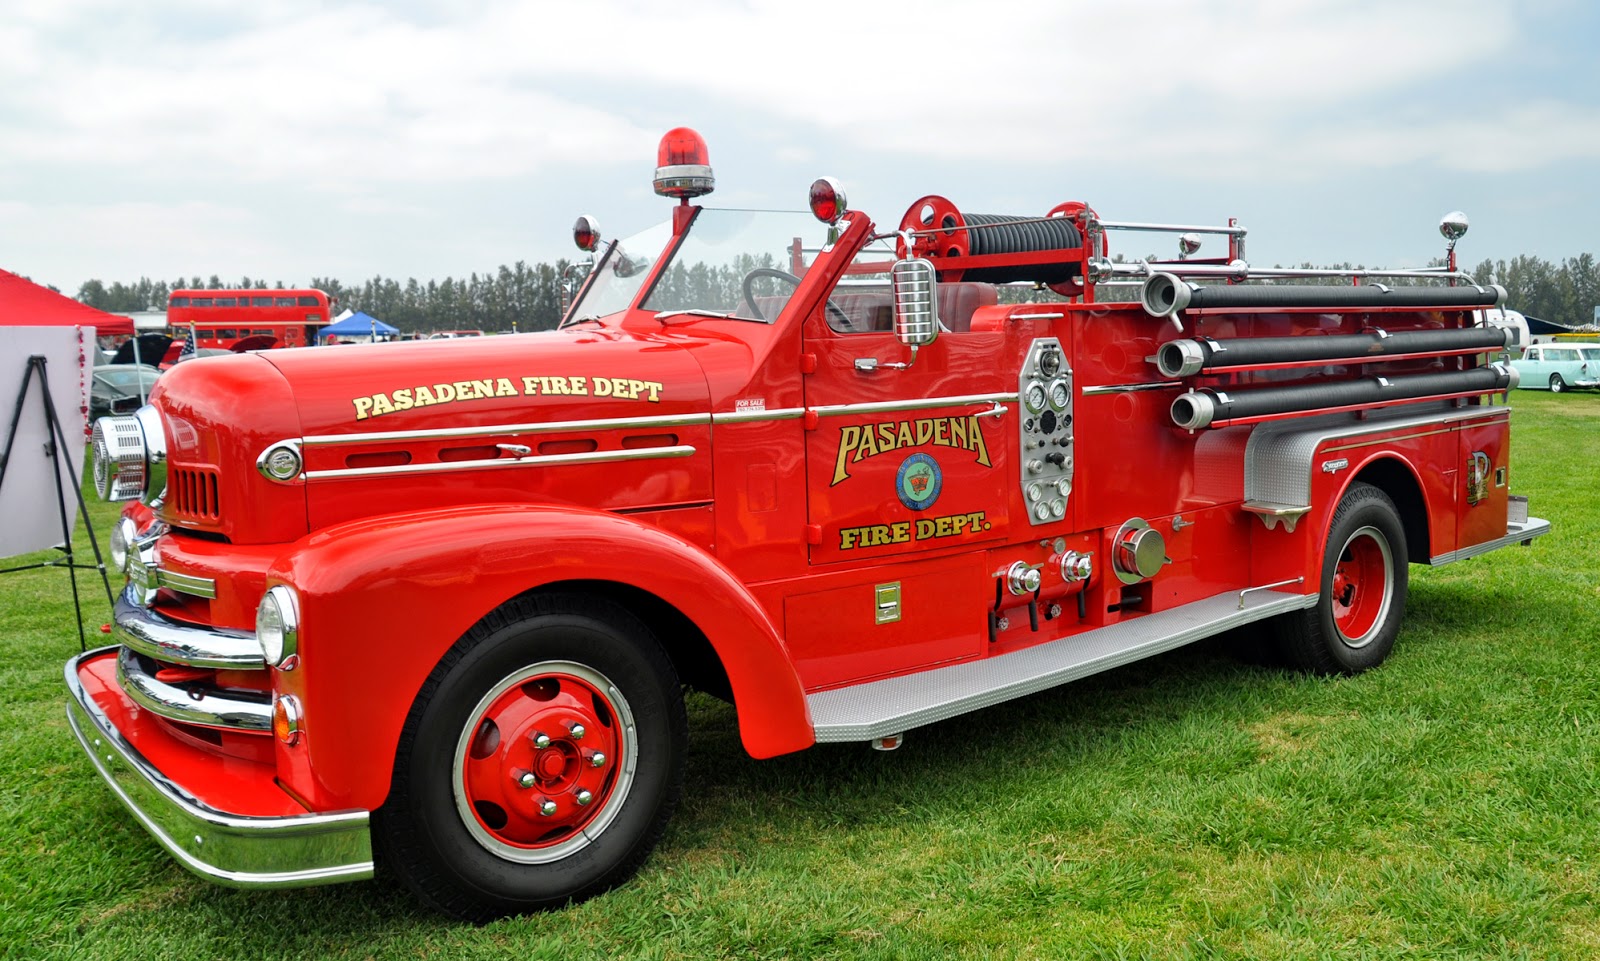 Seagrave Fire Truck Backgrounds, Compatible - PC, Mobile, Gadgets| 1600x961 px